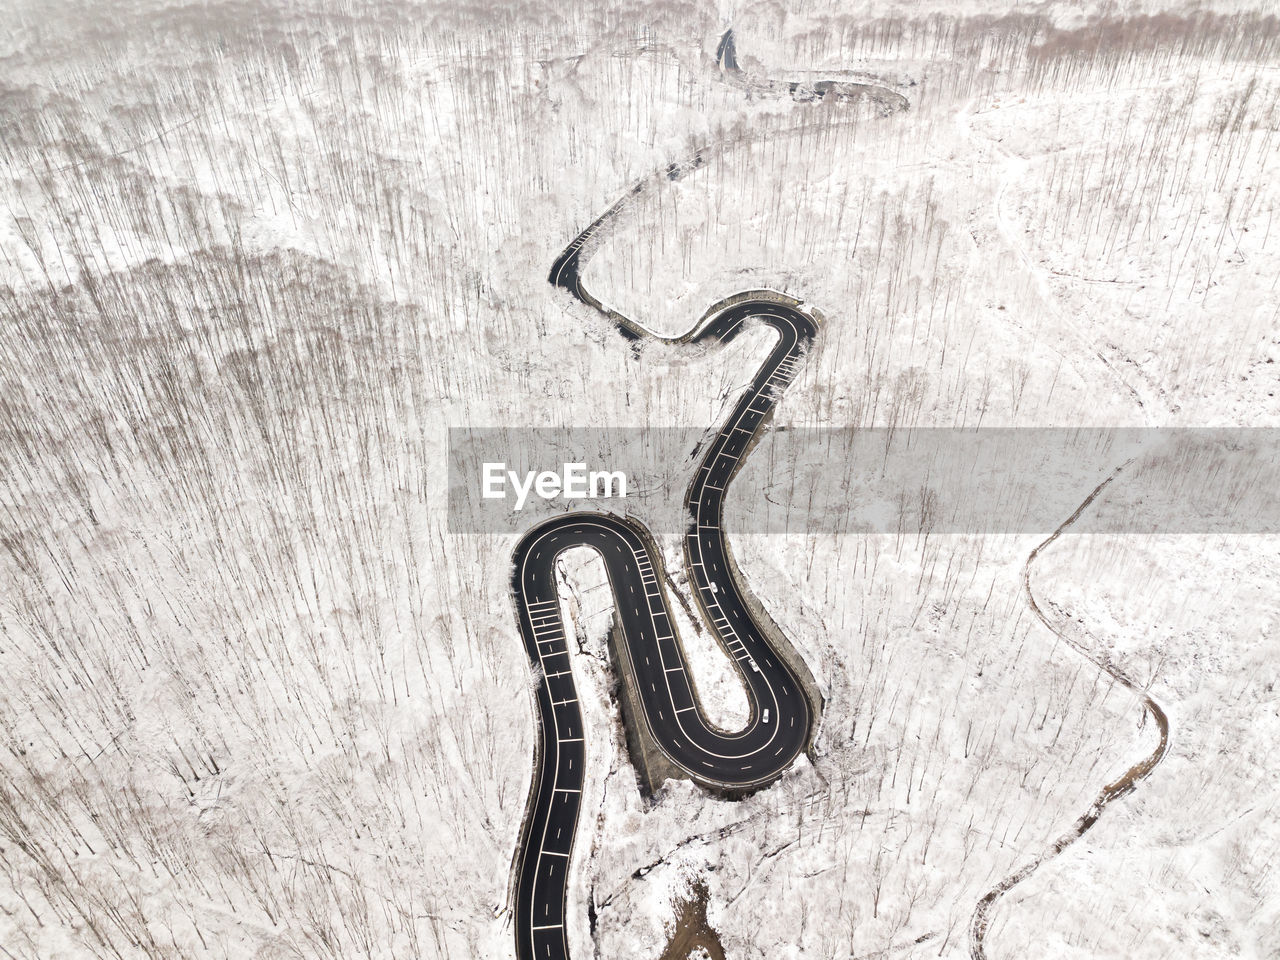 Curvy windy road in snow covered forest, top down aerial view.